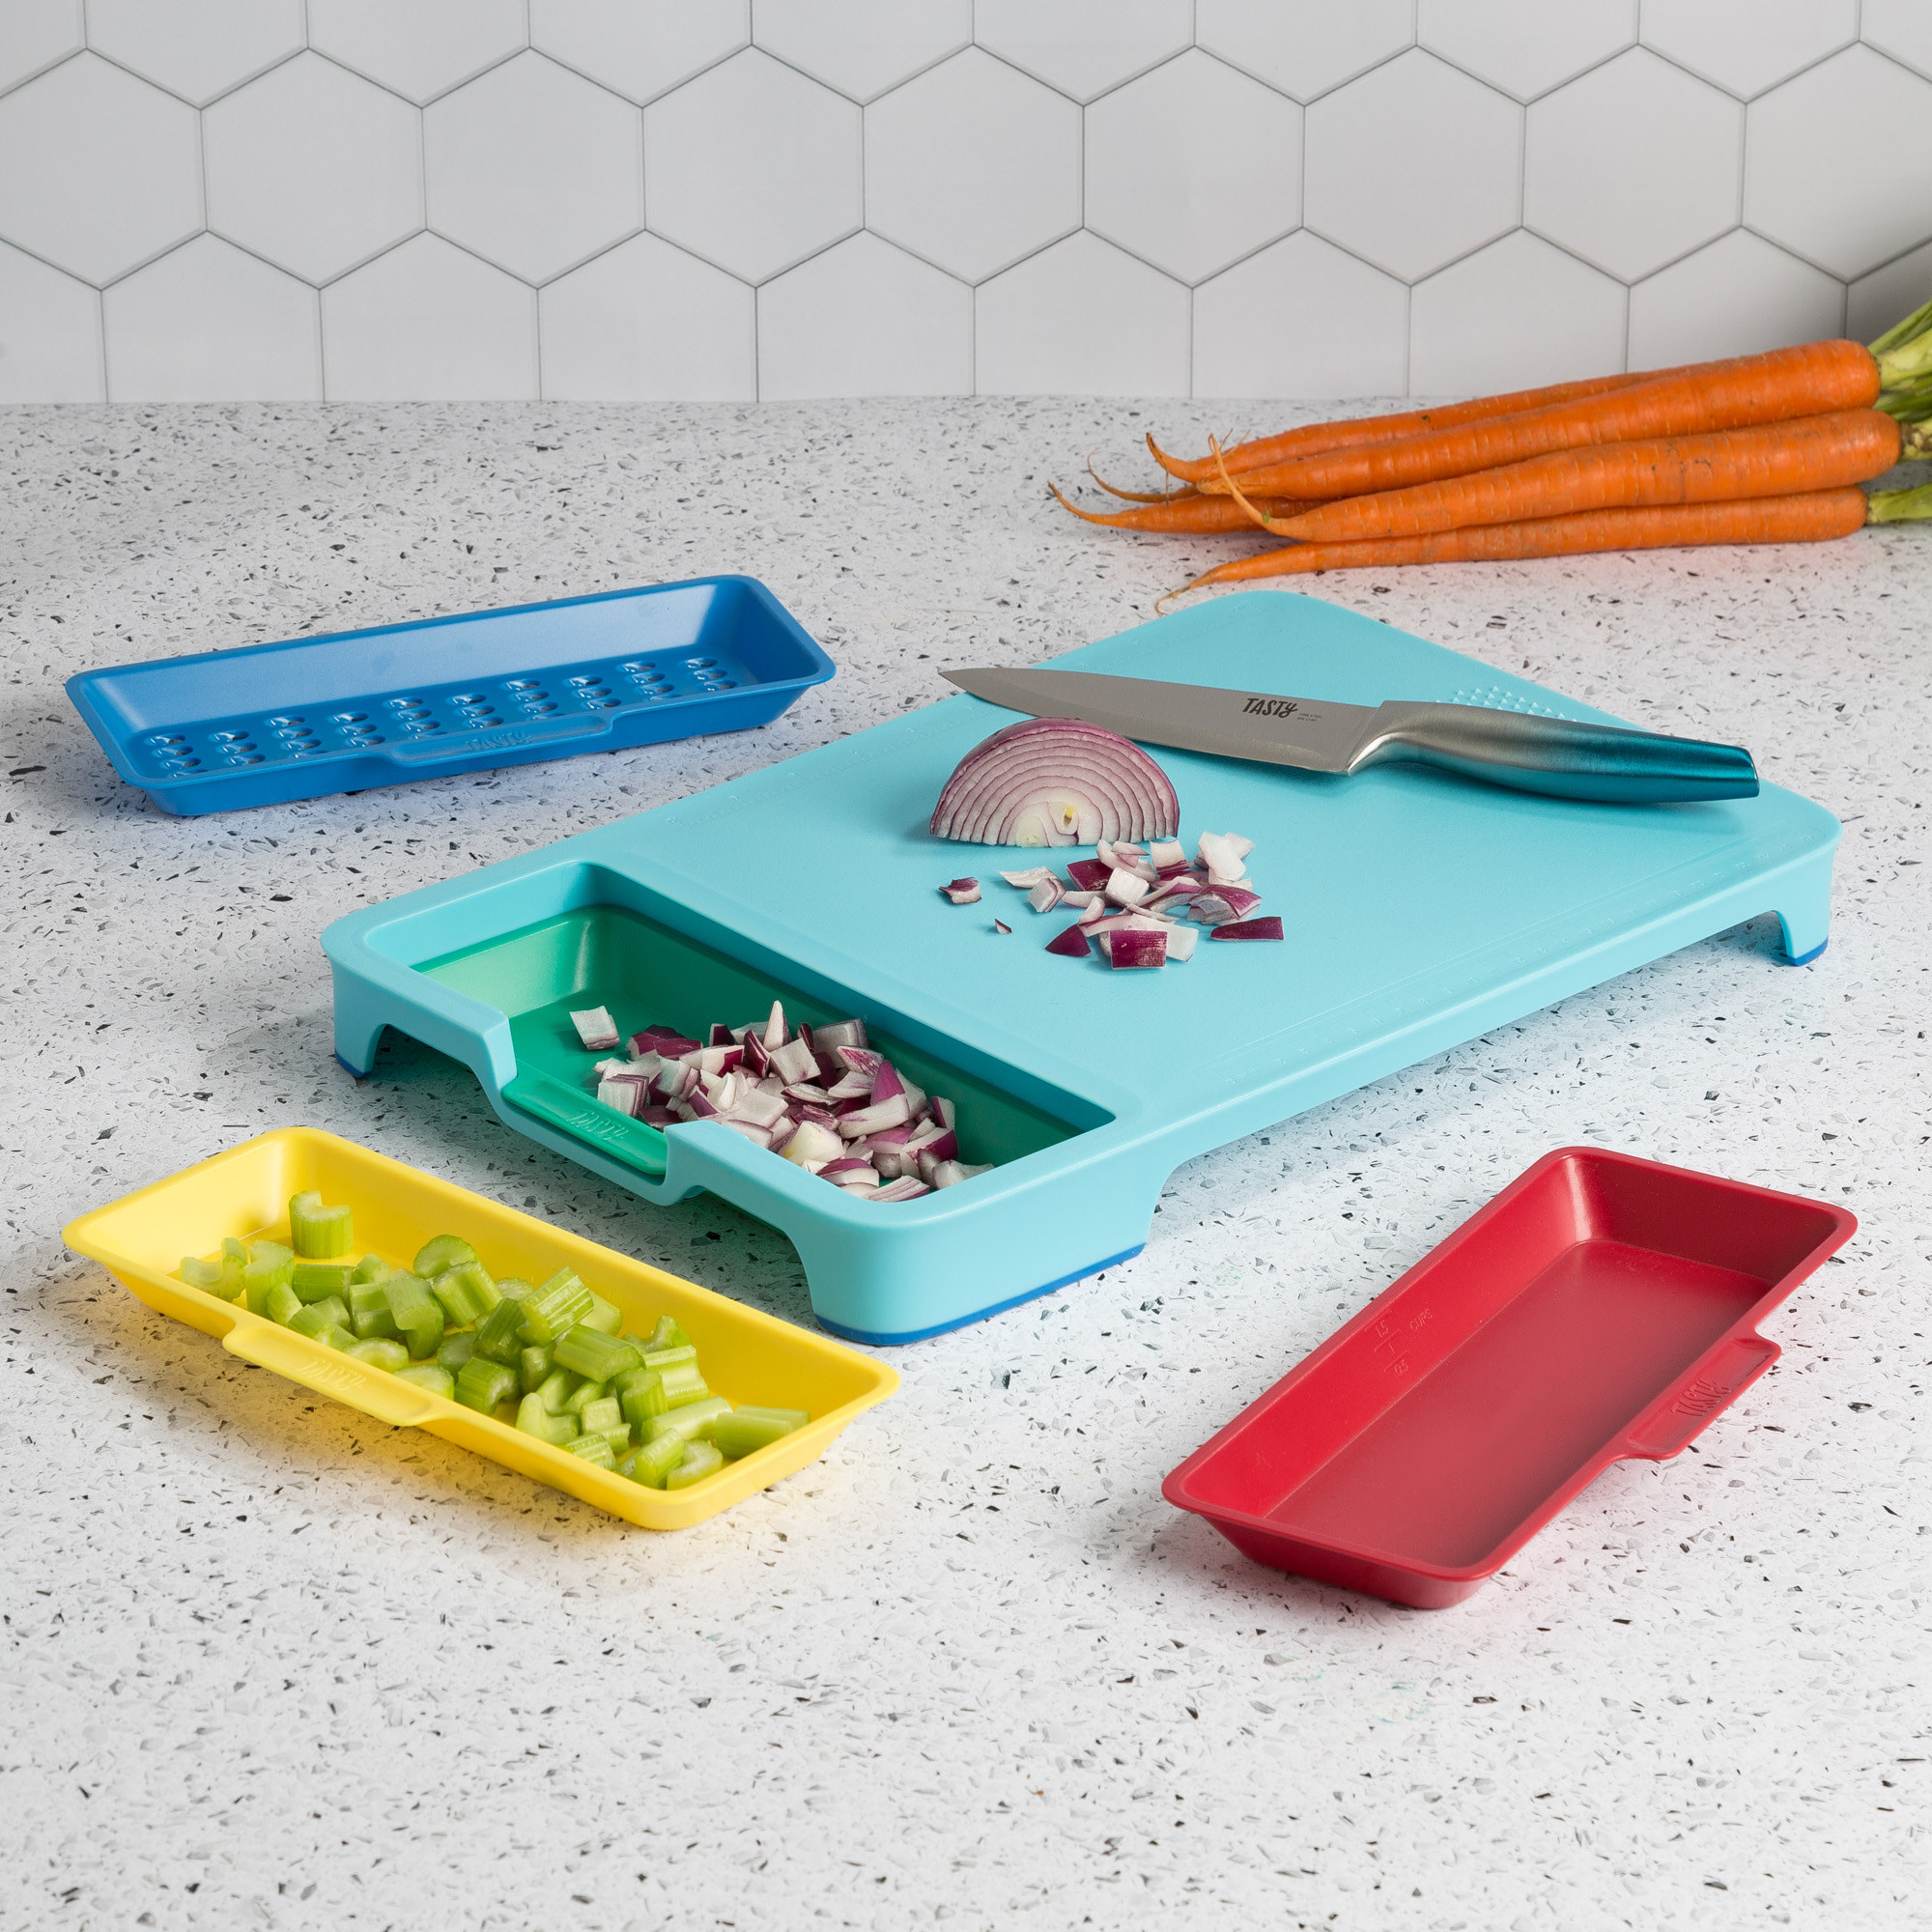 the blue cutting board with removable trays